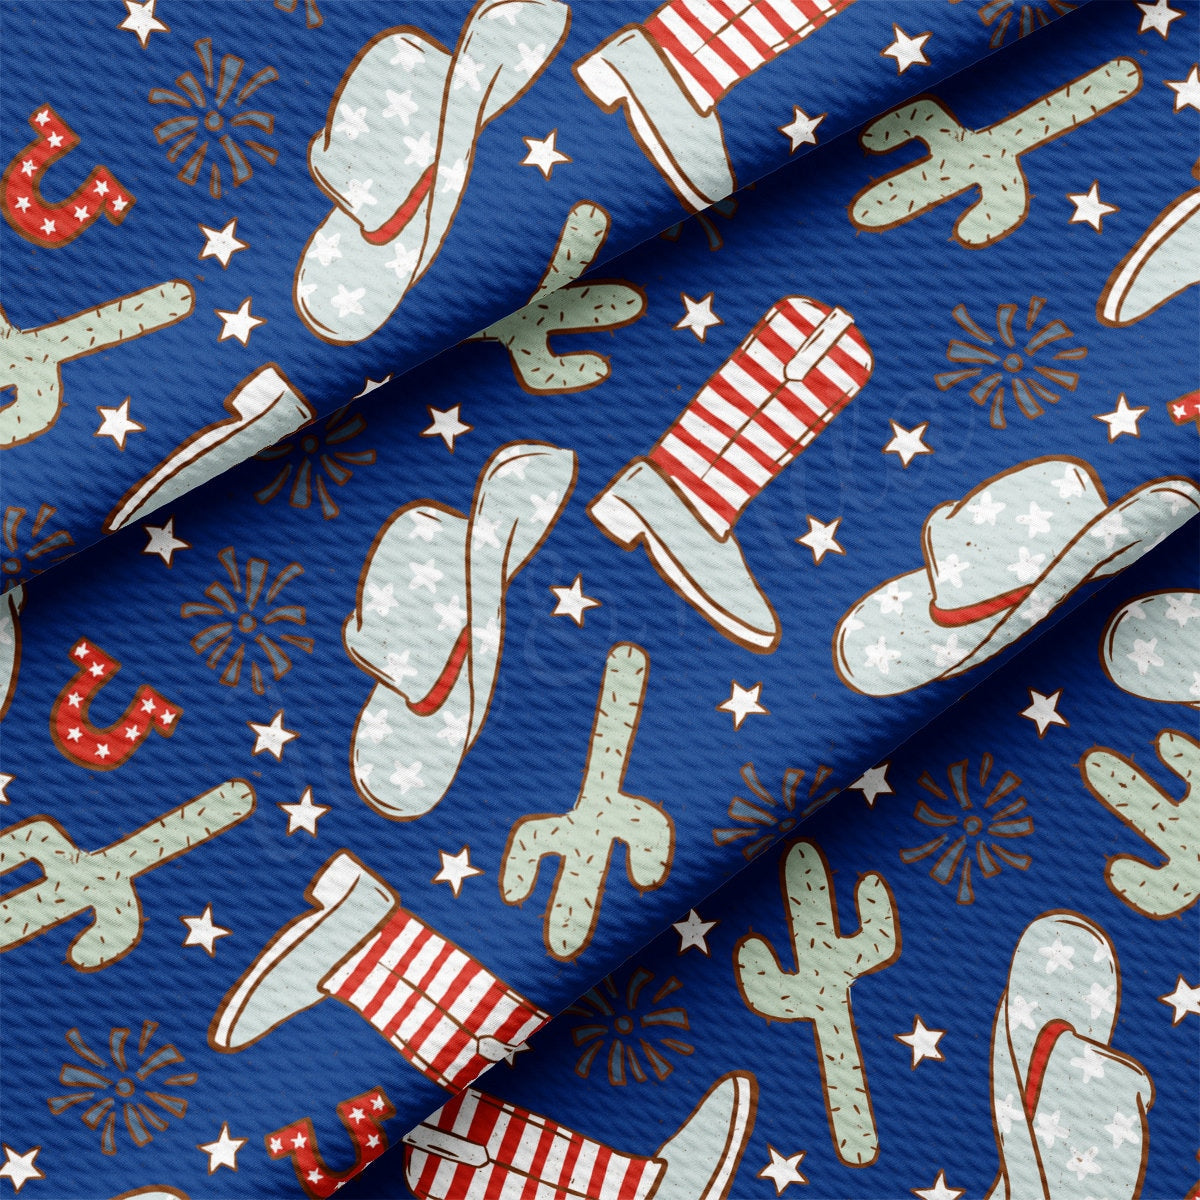 Bullet Fabric AA2611 Patriotic 4th of July